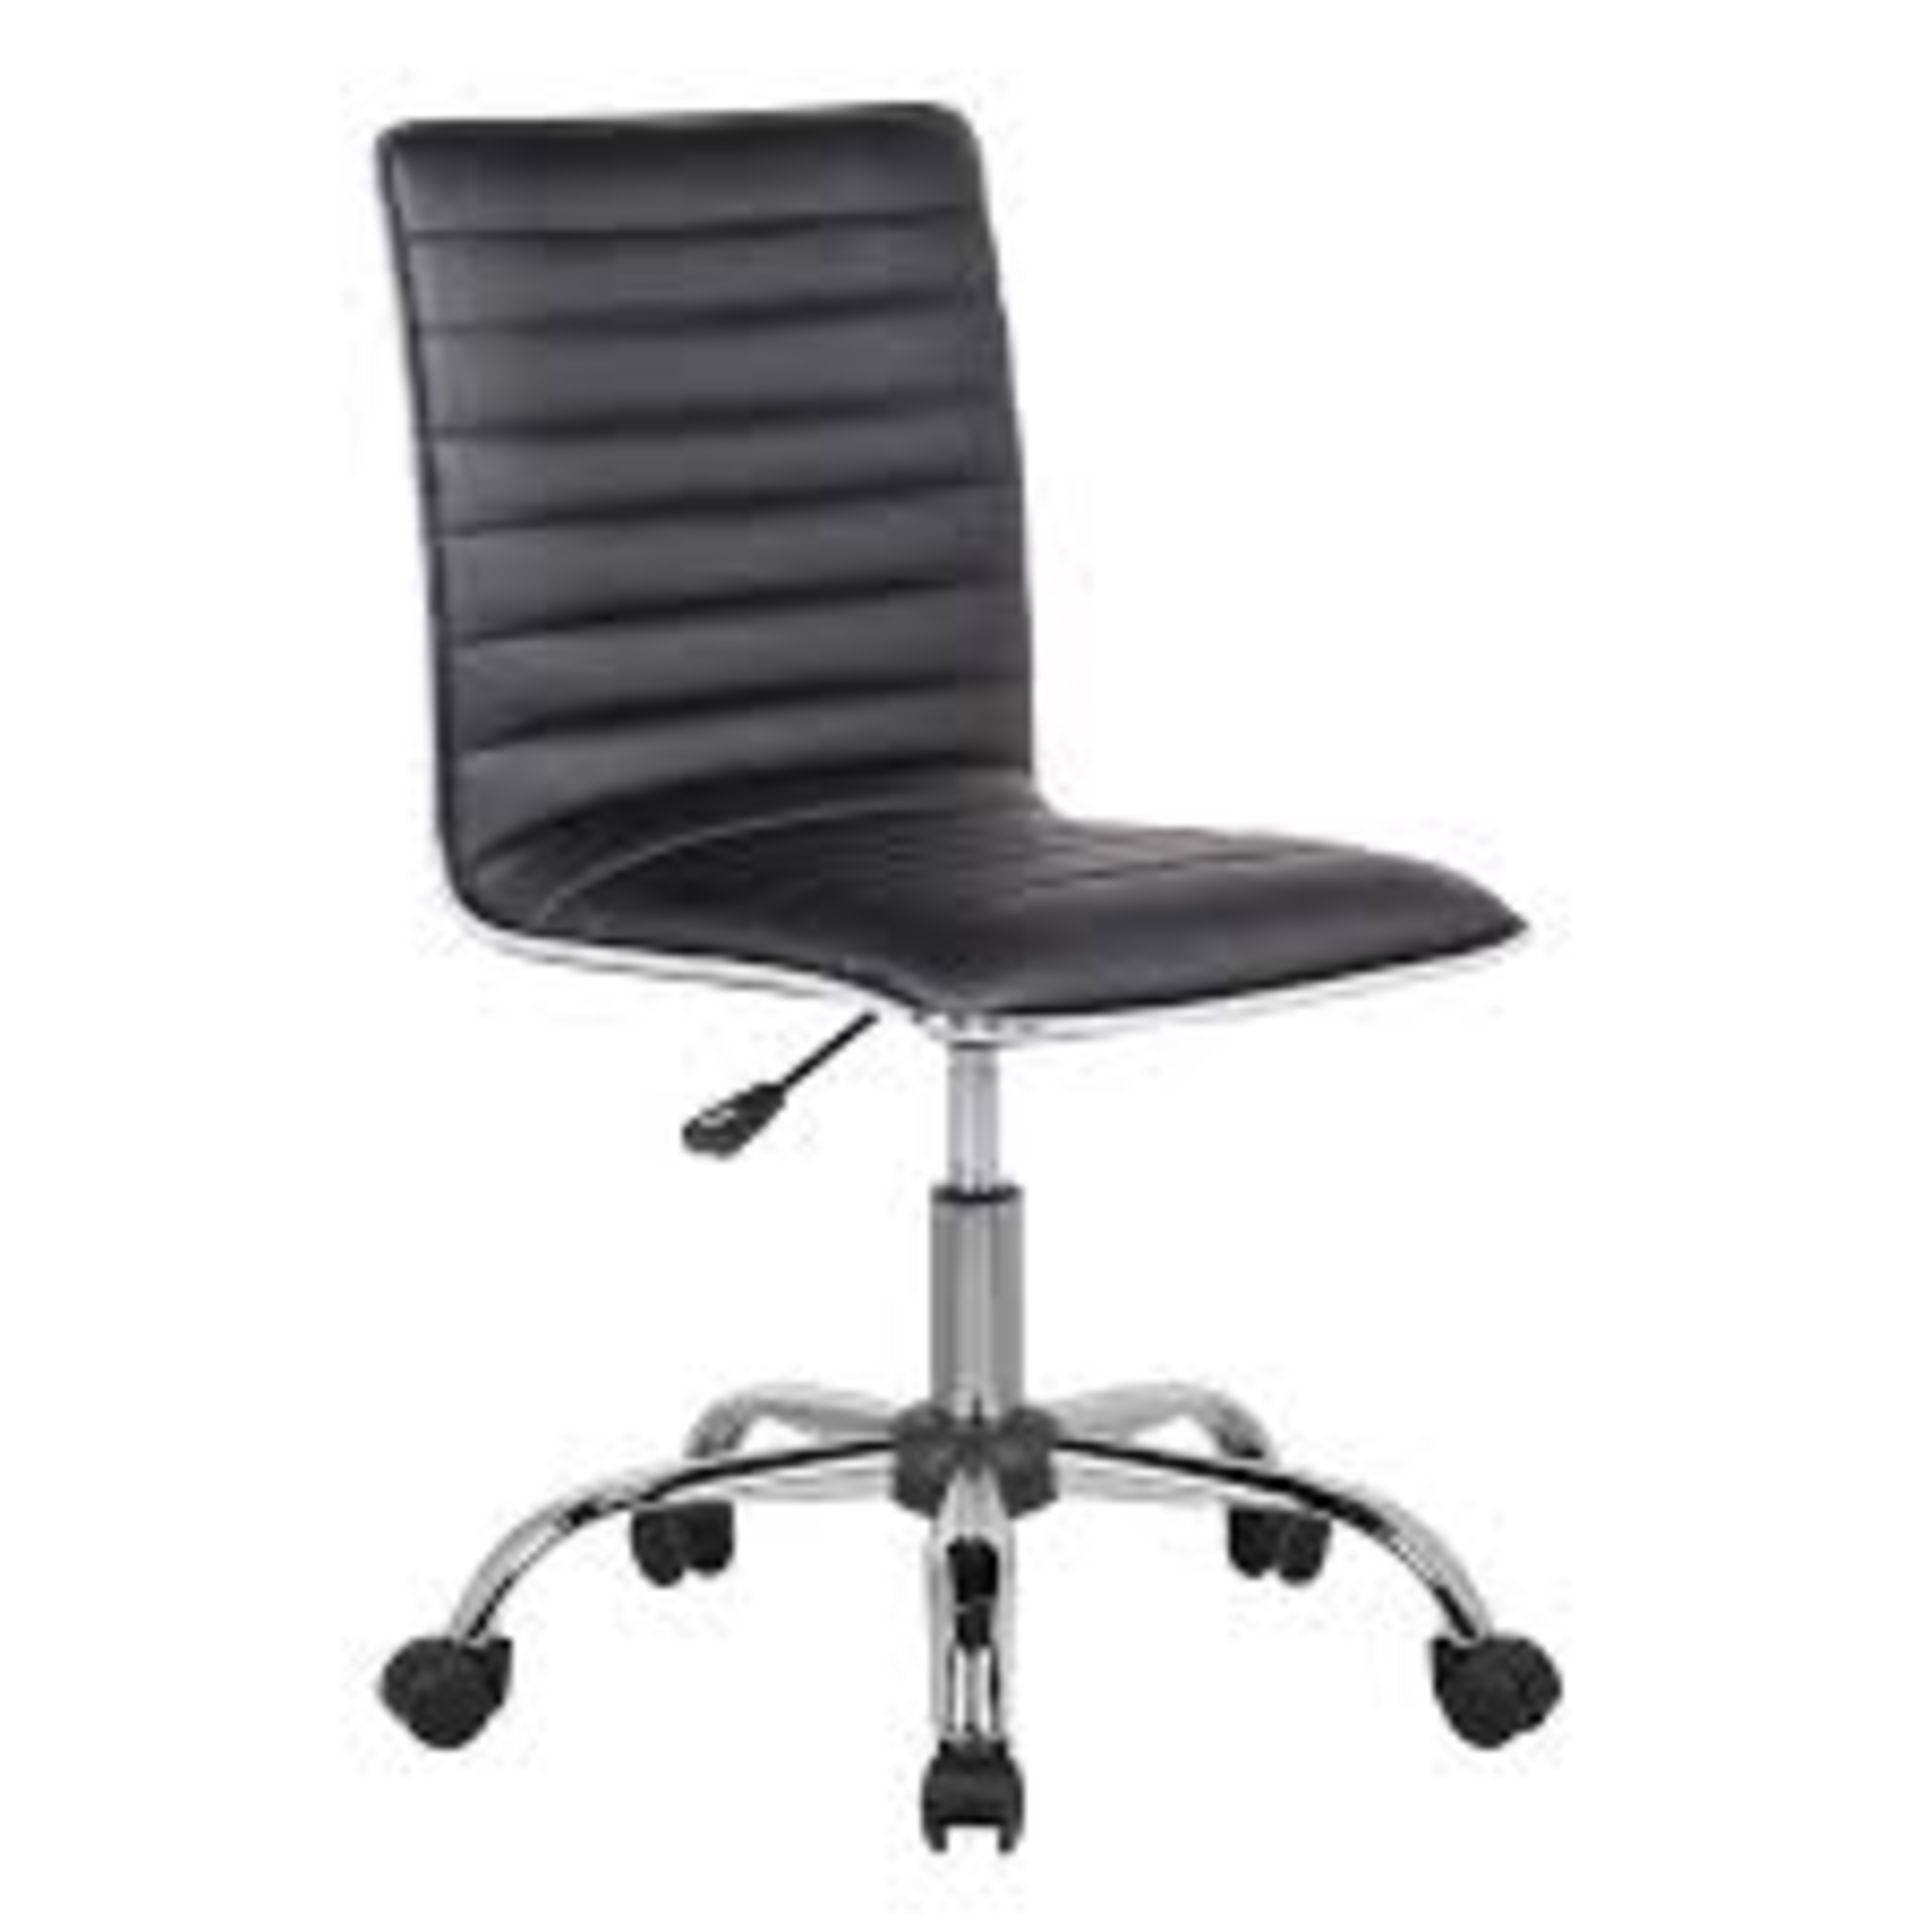 BOXED PORTRHOS HOME OFFICE CHAIR ITEM# EFC016A COLOR: BLACK RRP £94.99 (AS SEEN IN WAYFAIR)Condition